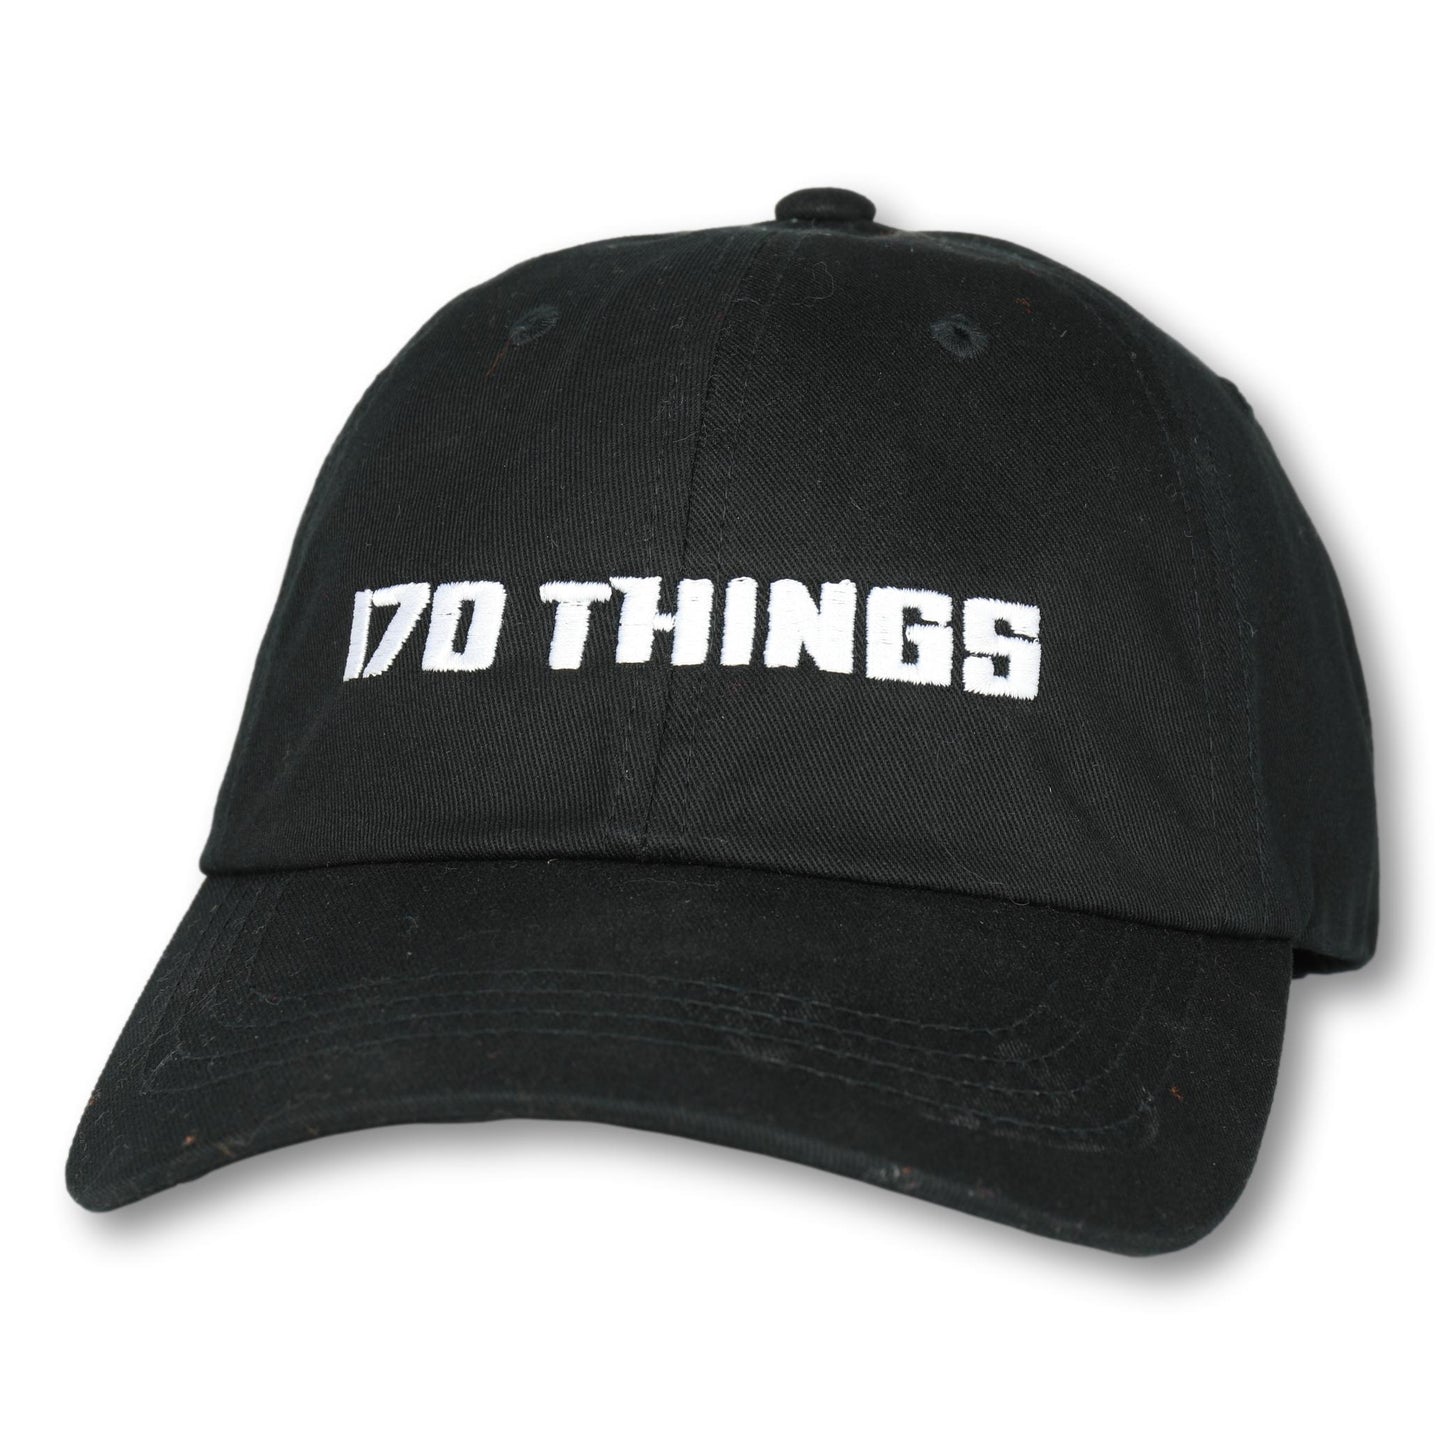 I-70 Things Dad Hat